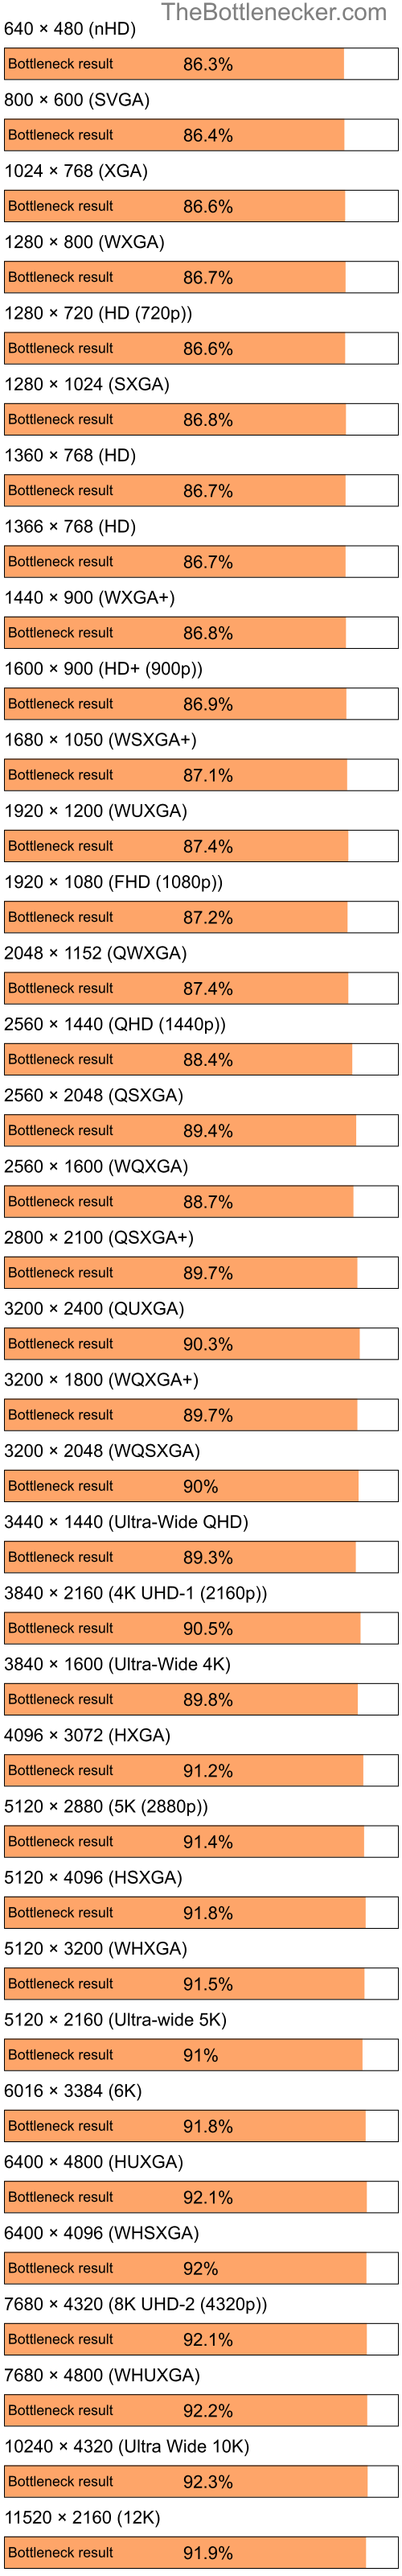 Bottleneck results by resolution for Intel Pentium 4 and NVIDIA MX 400 in Processor Intense Tasks